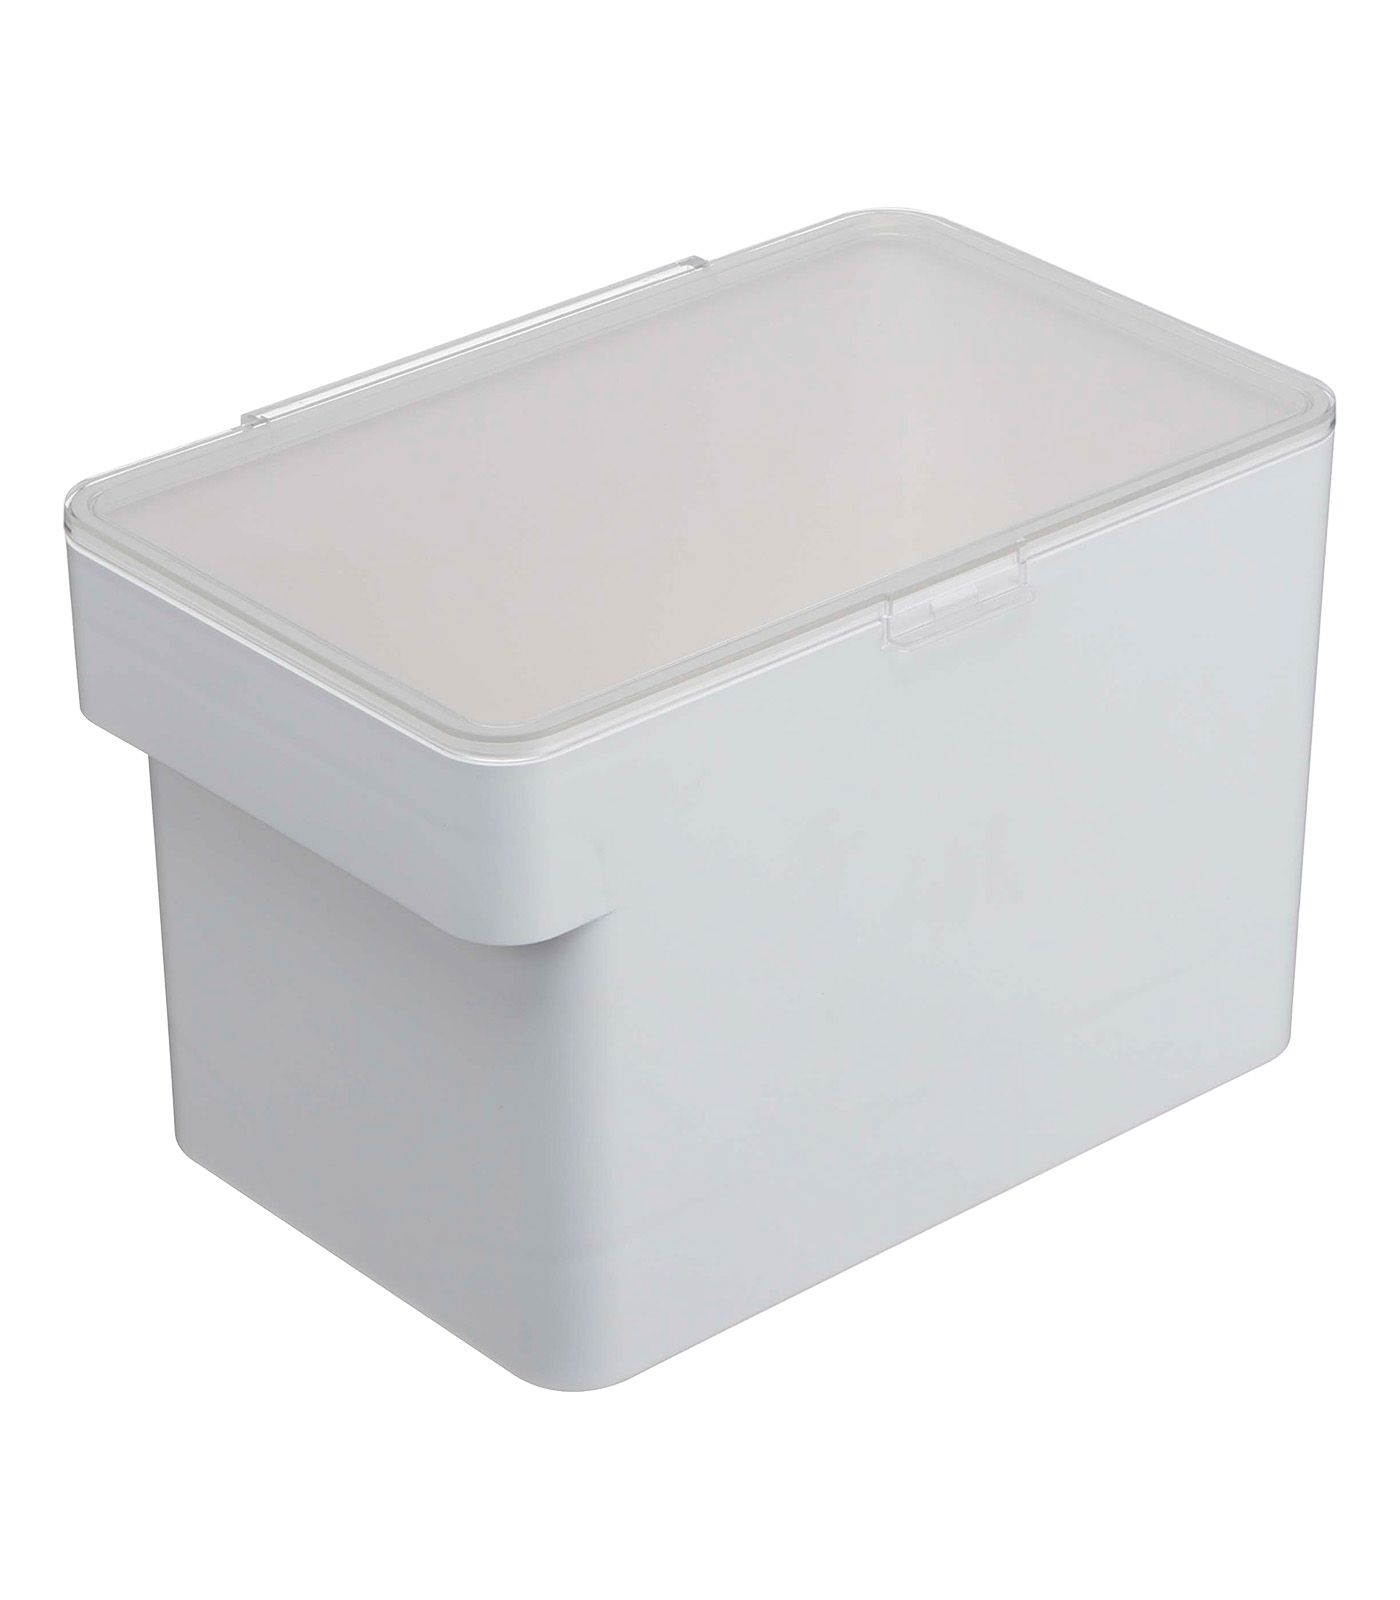 https://www.containerstore.com/catalogimages/488875/Nbfn9-Mw.jpg